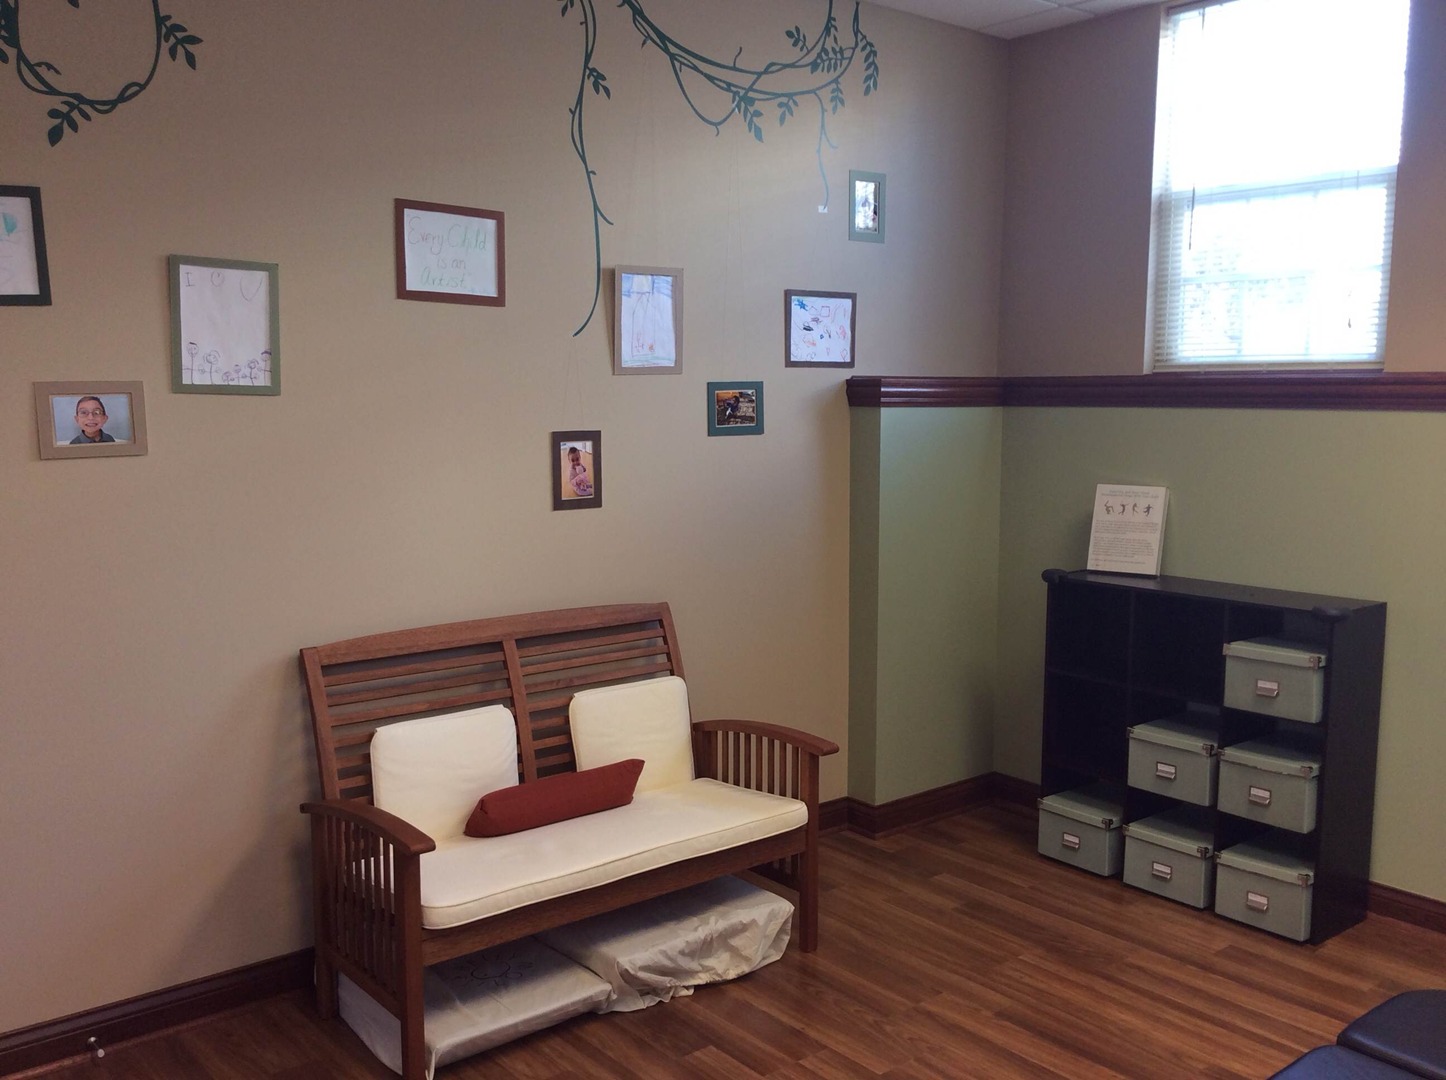 Chiropractic room for kids, moms and babies